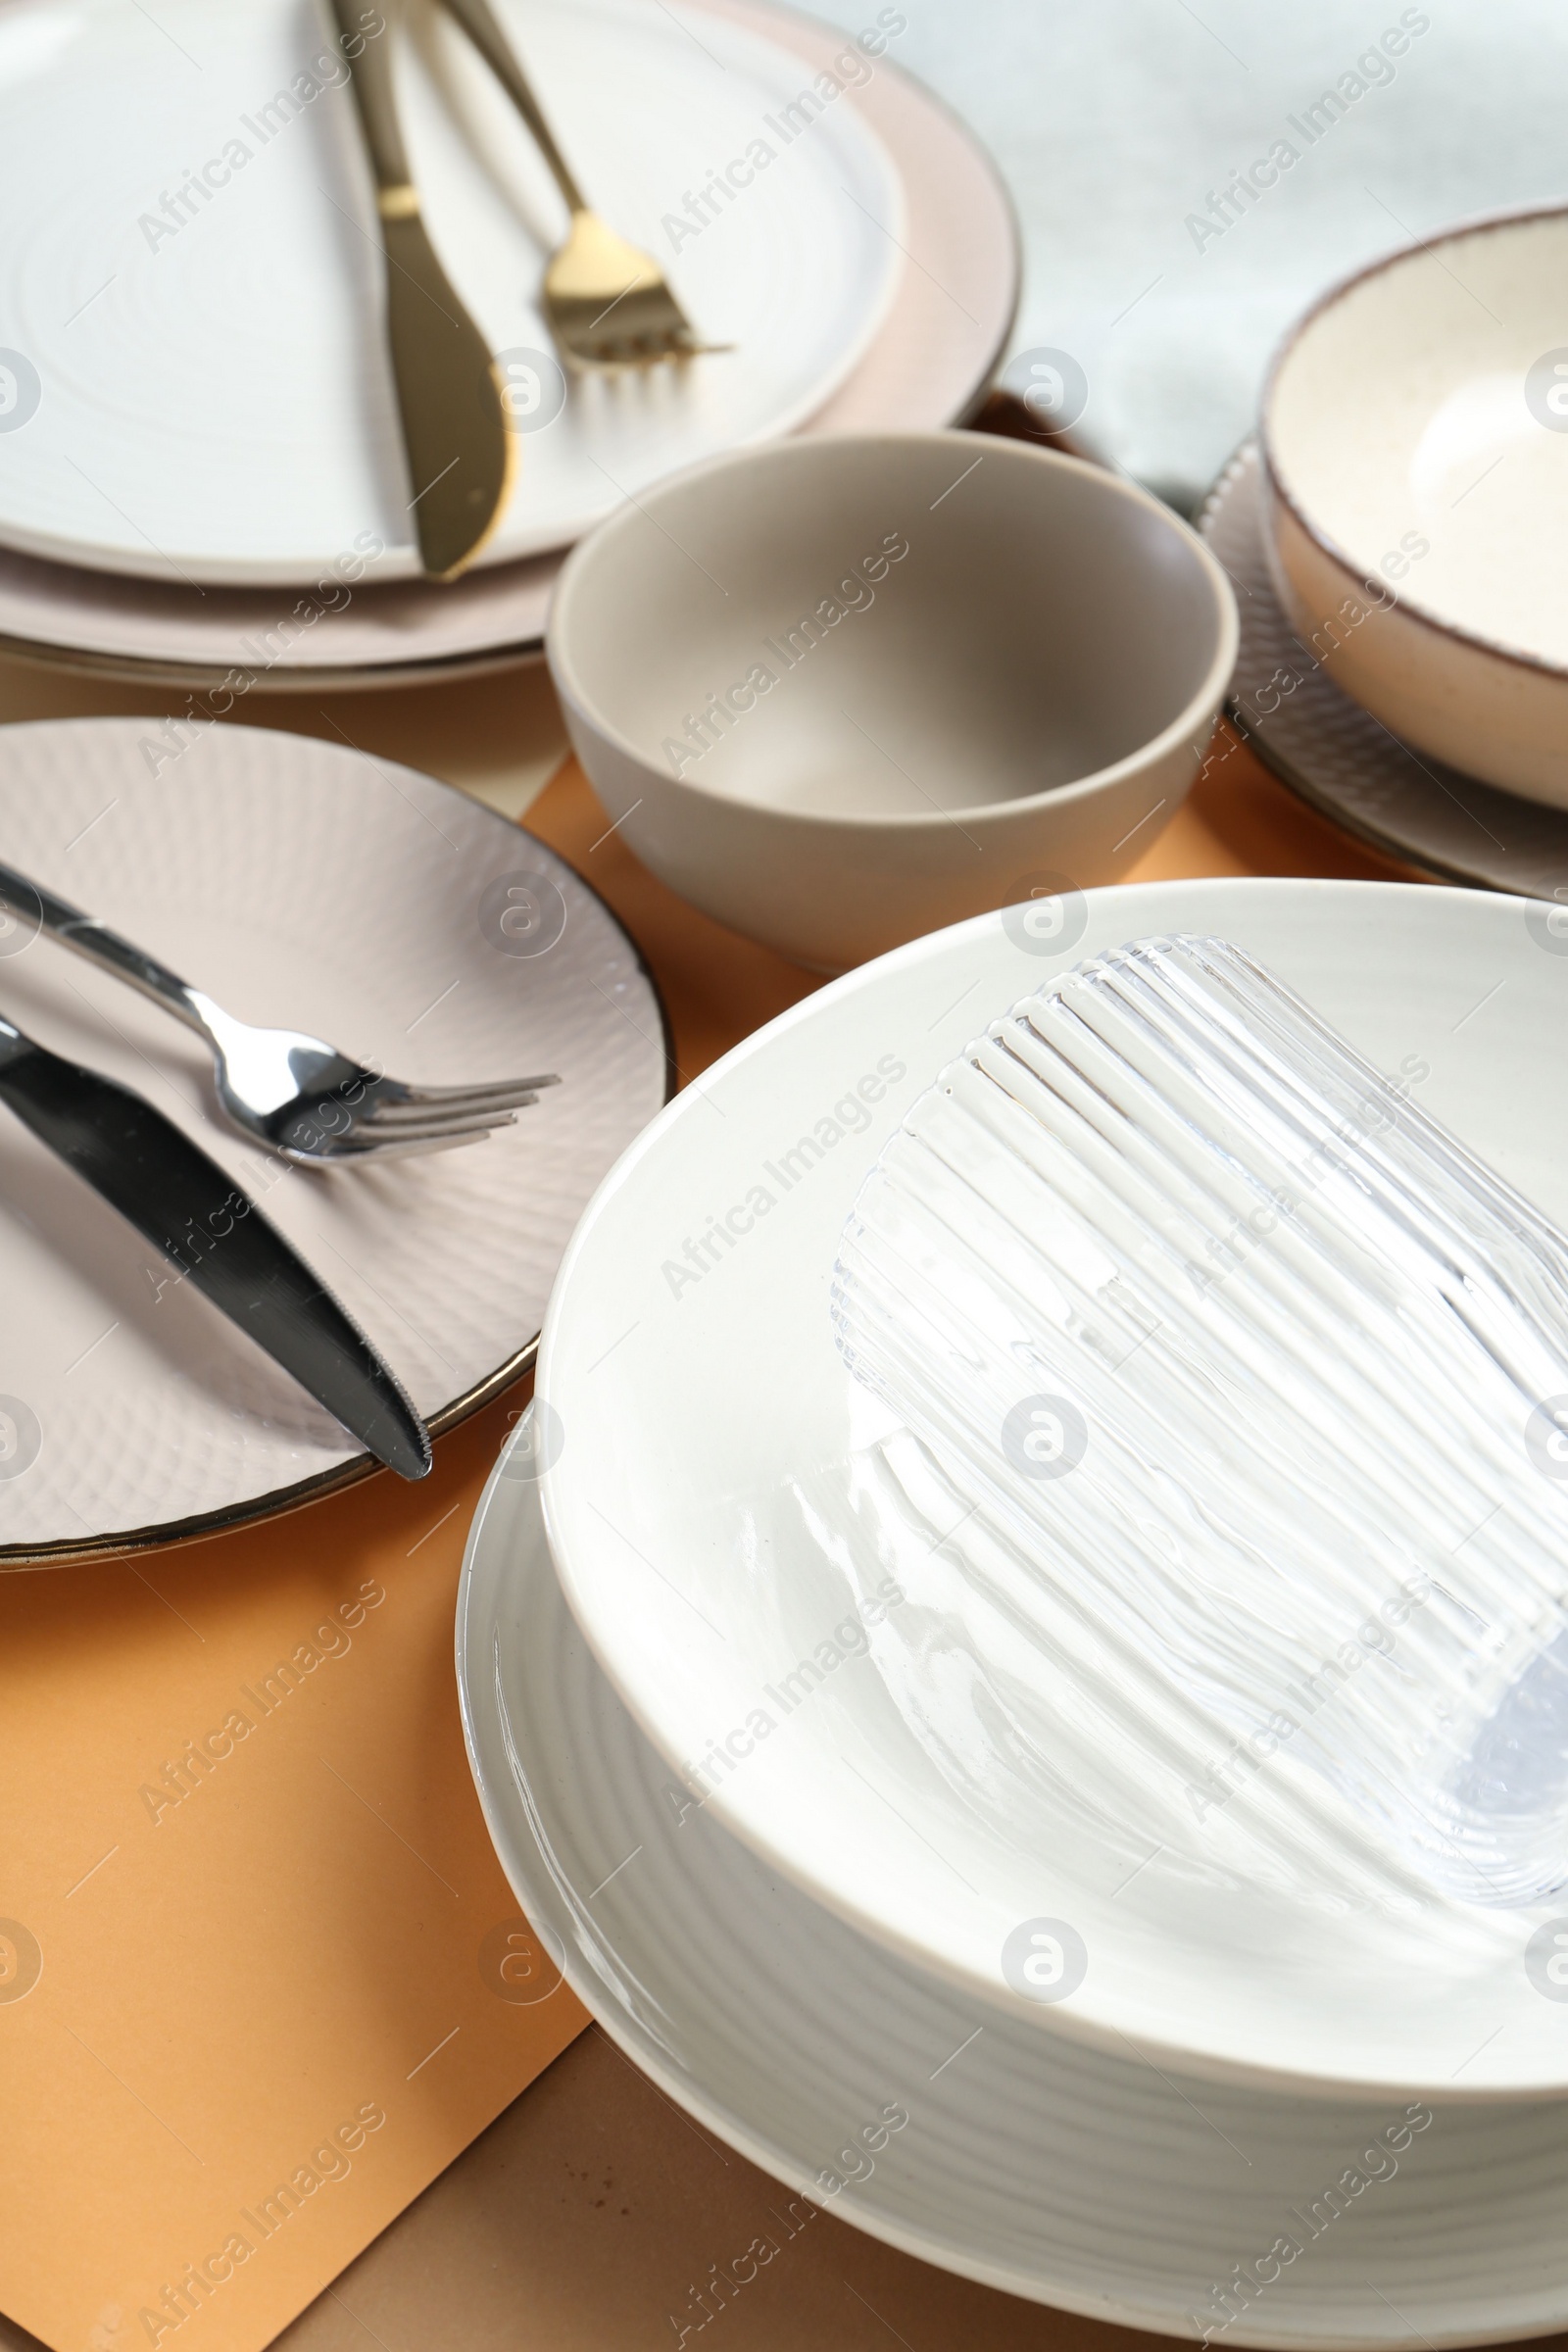 Photo of Clean plates, bowls, glass and cutlery on table